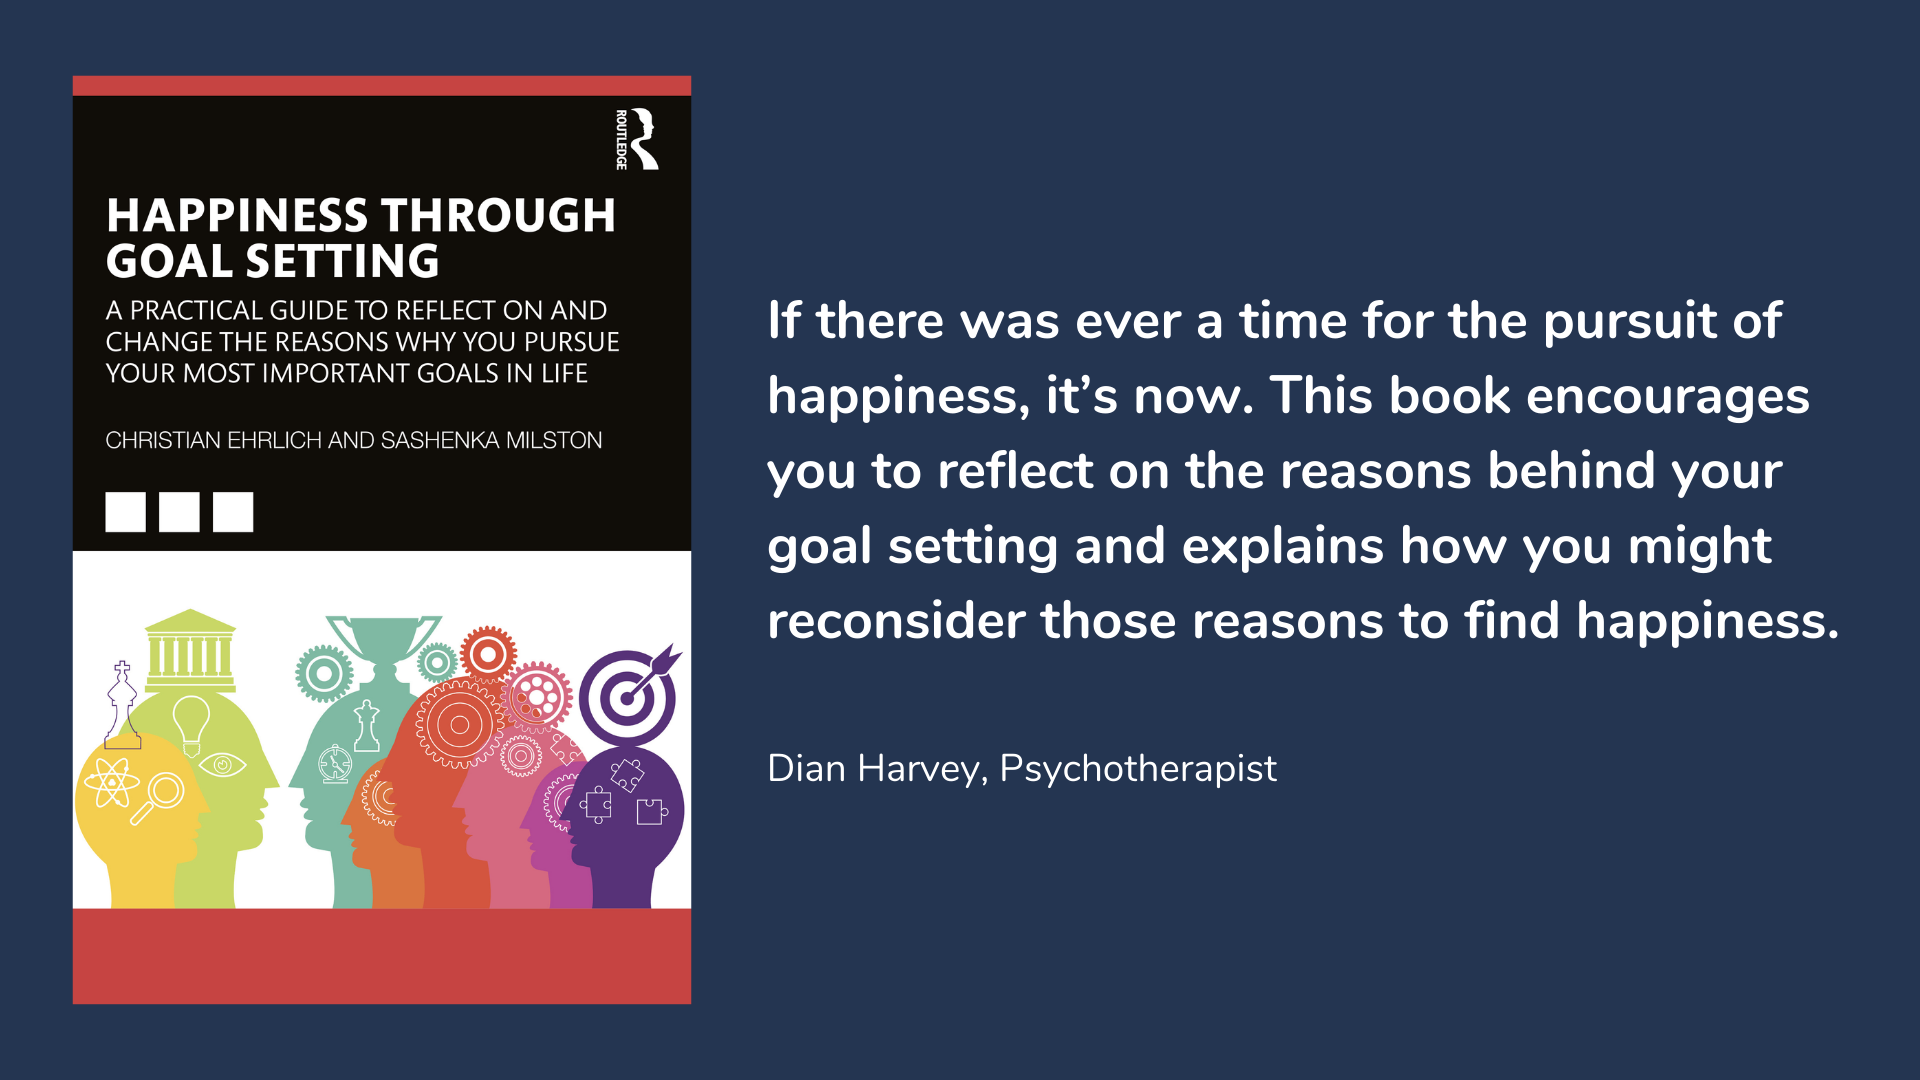 Happiness Through Goal Setting, book cover and description.